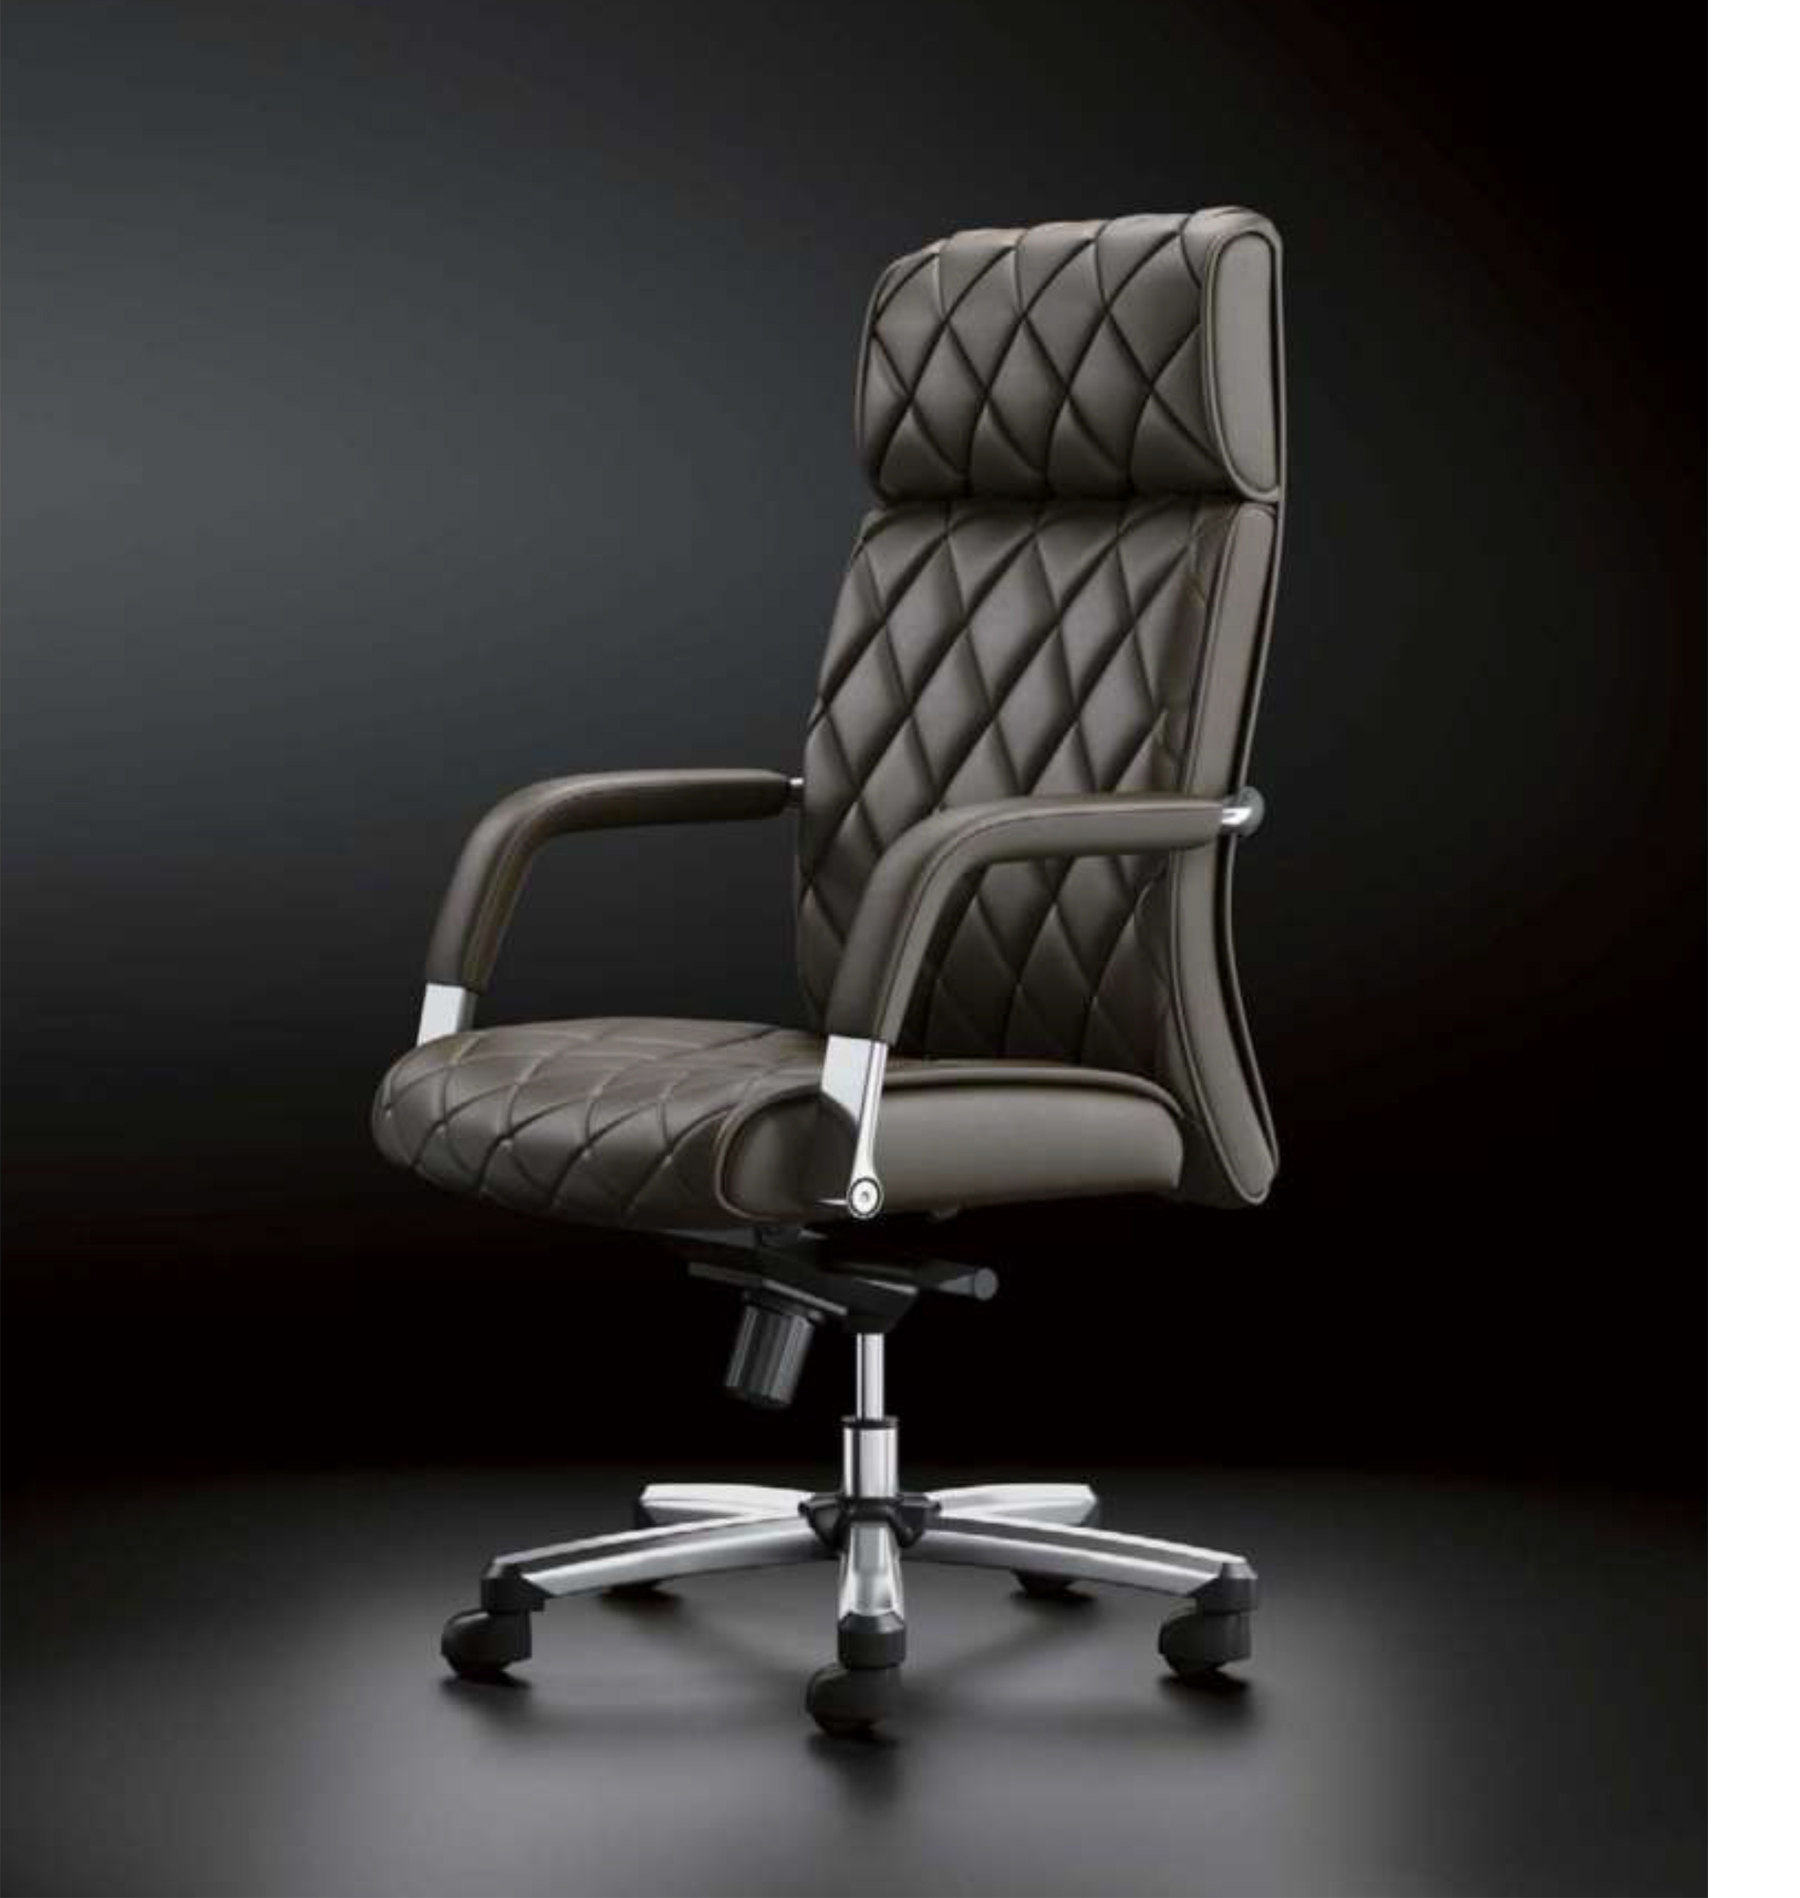 Do you know the Top Rated Ergonomic Office Chairs?